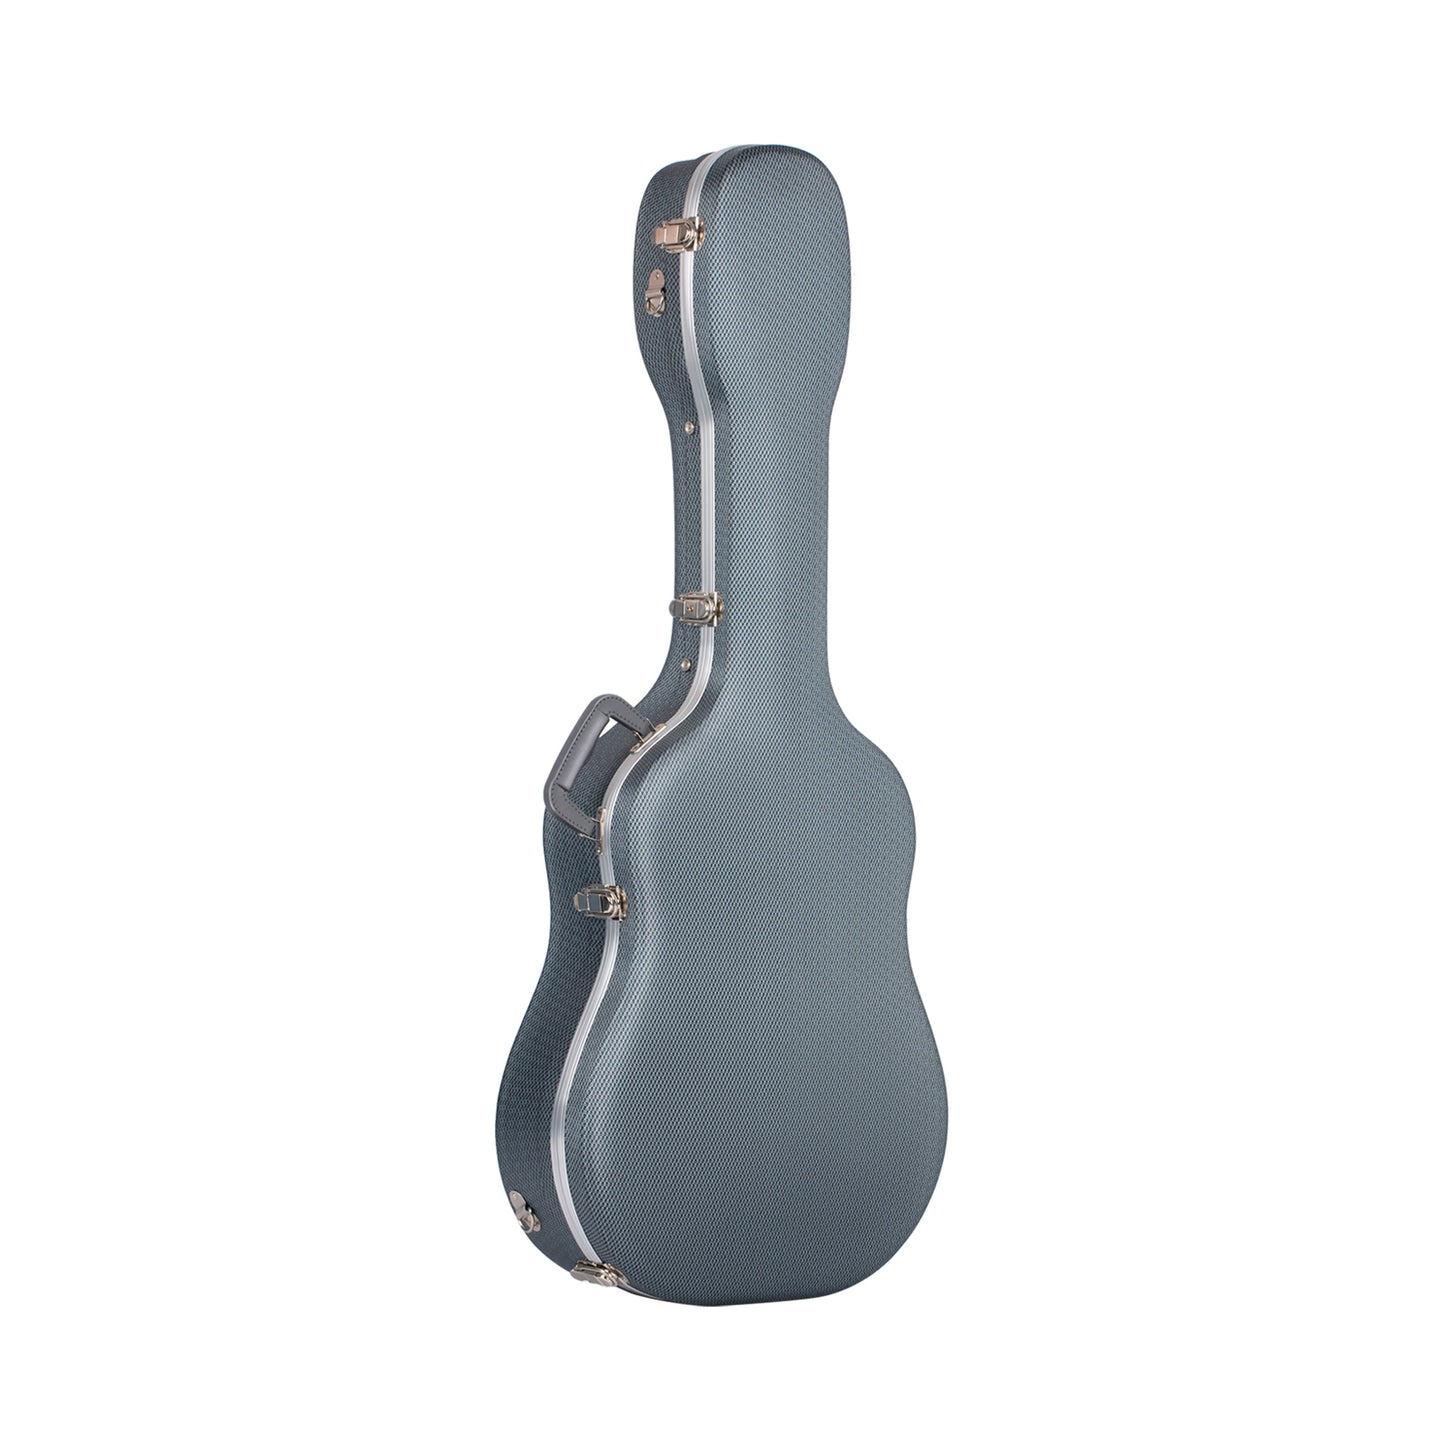 ABS 0.6in Thick Hardshell Guitar Case CY0246 CY0247 CY0248